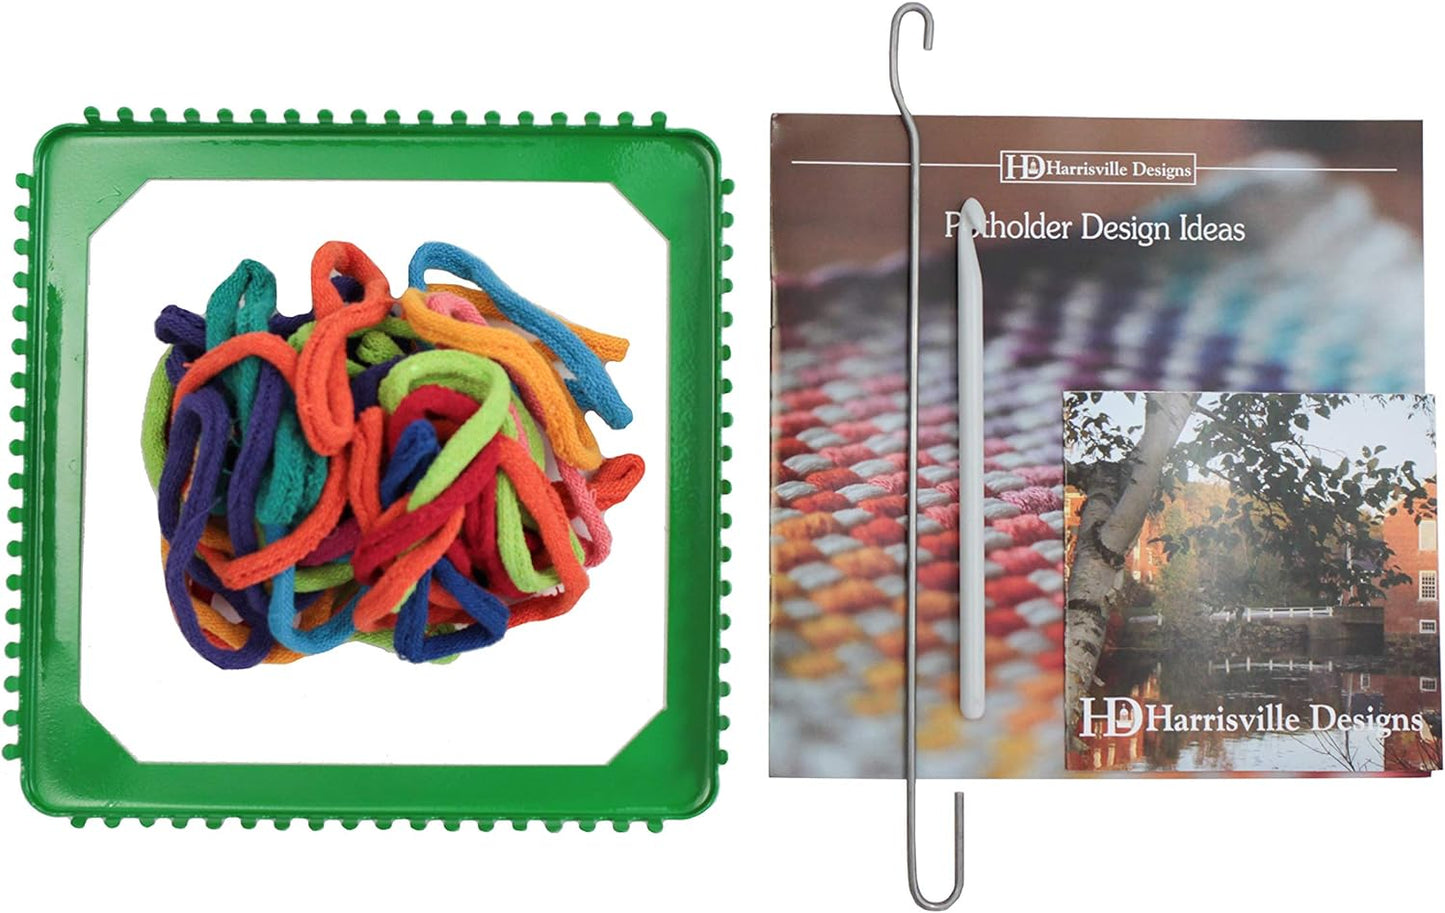 Friendly Loom 7" Potholder Kit Green Metal Loom and Bright Rainbow Color Cotton Loops, Makes 2 Potholders, MADE in the USA by .